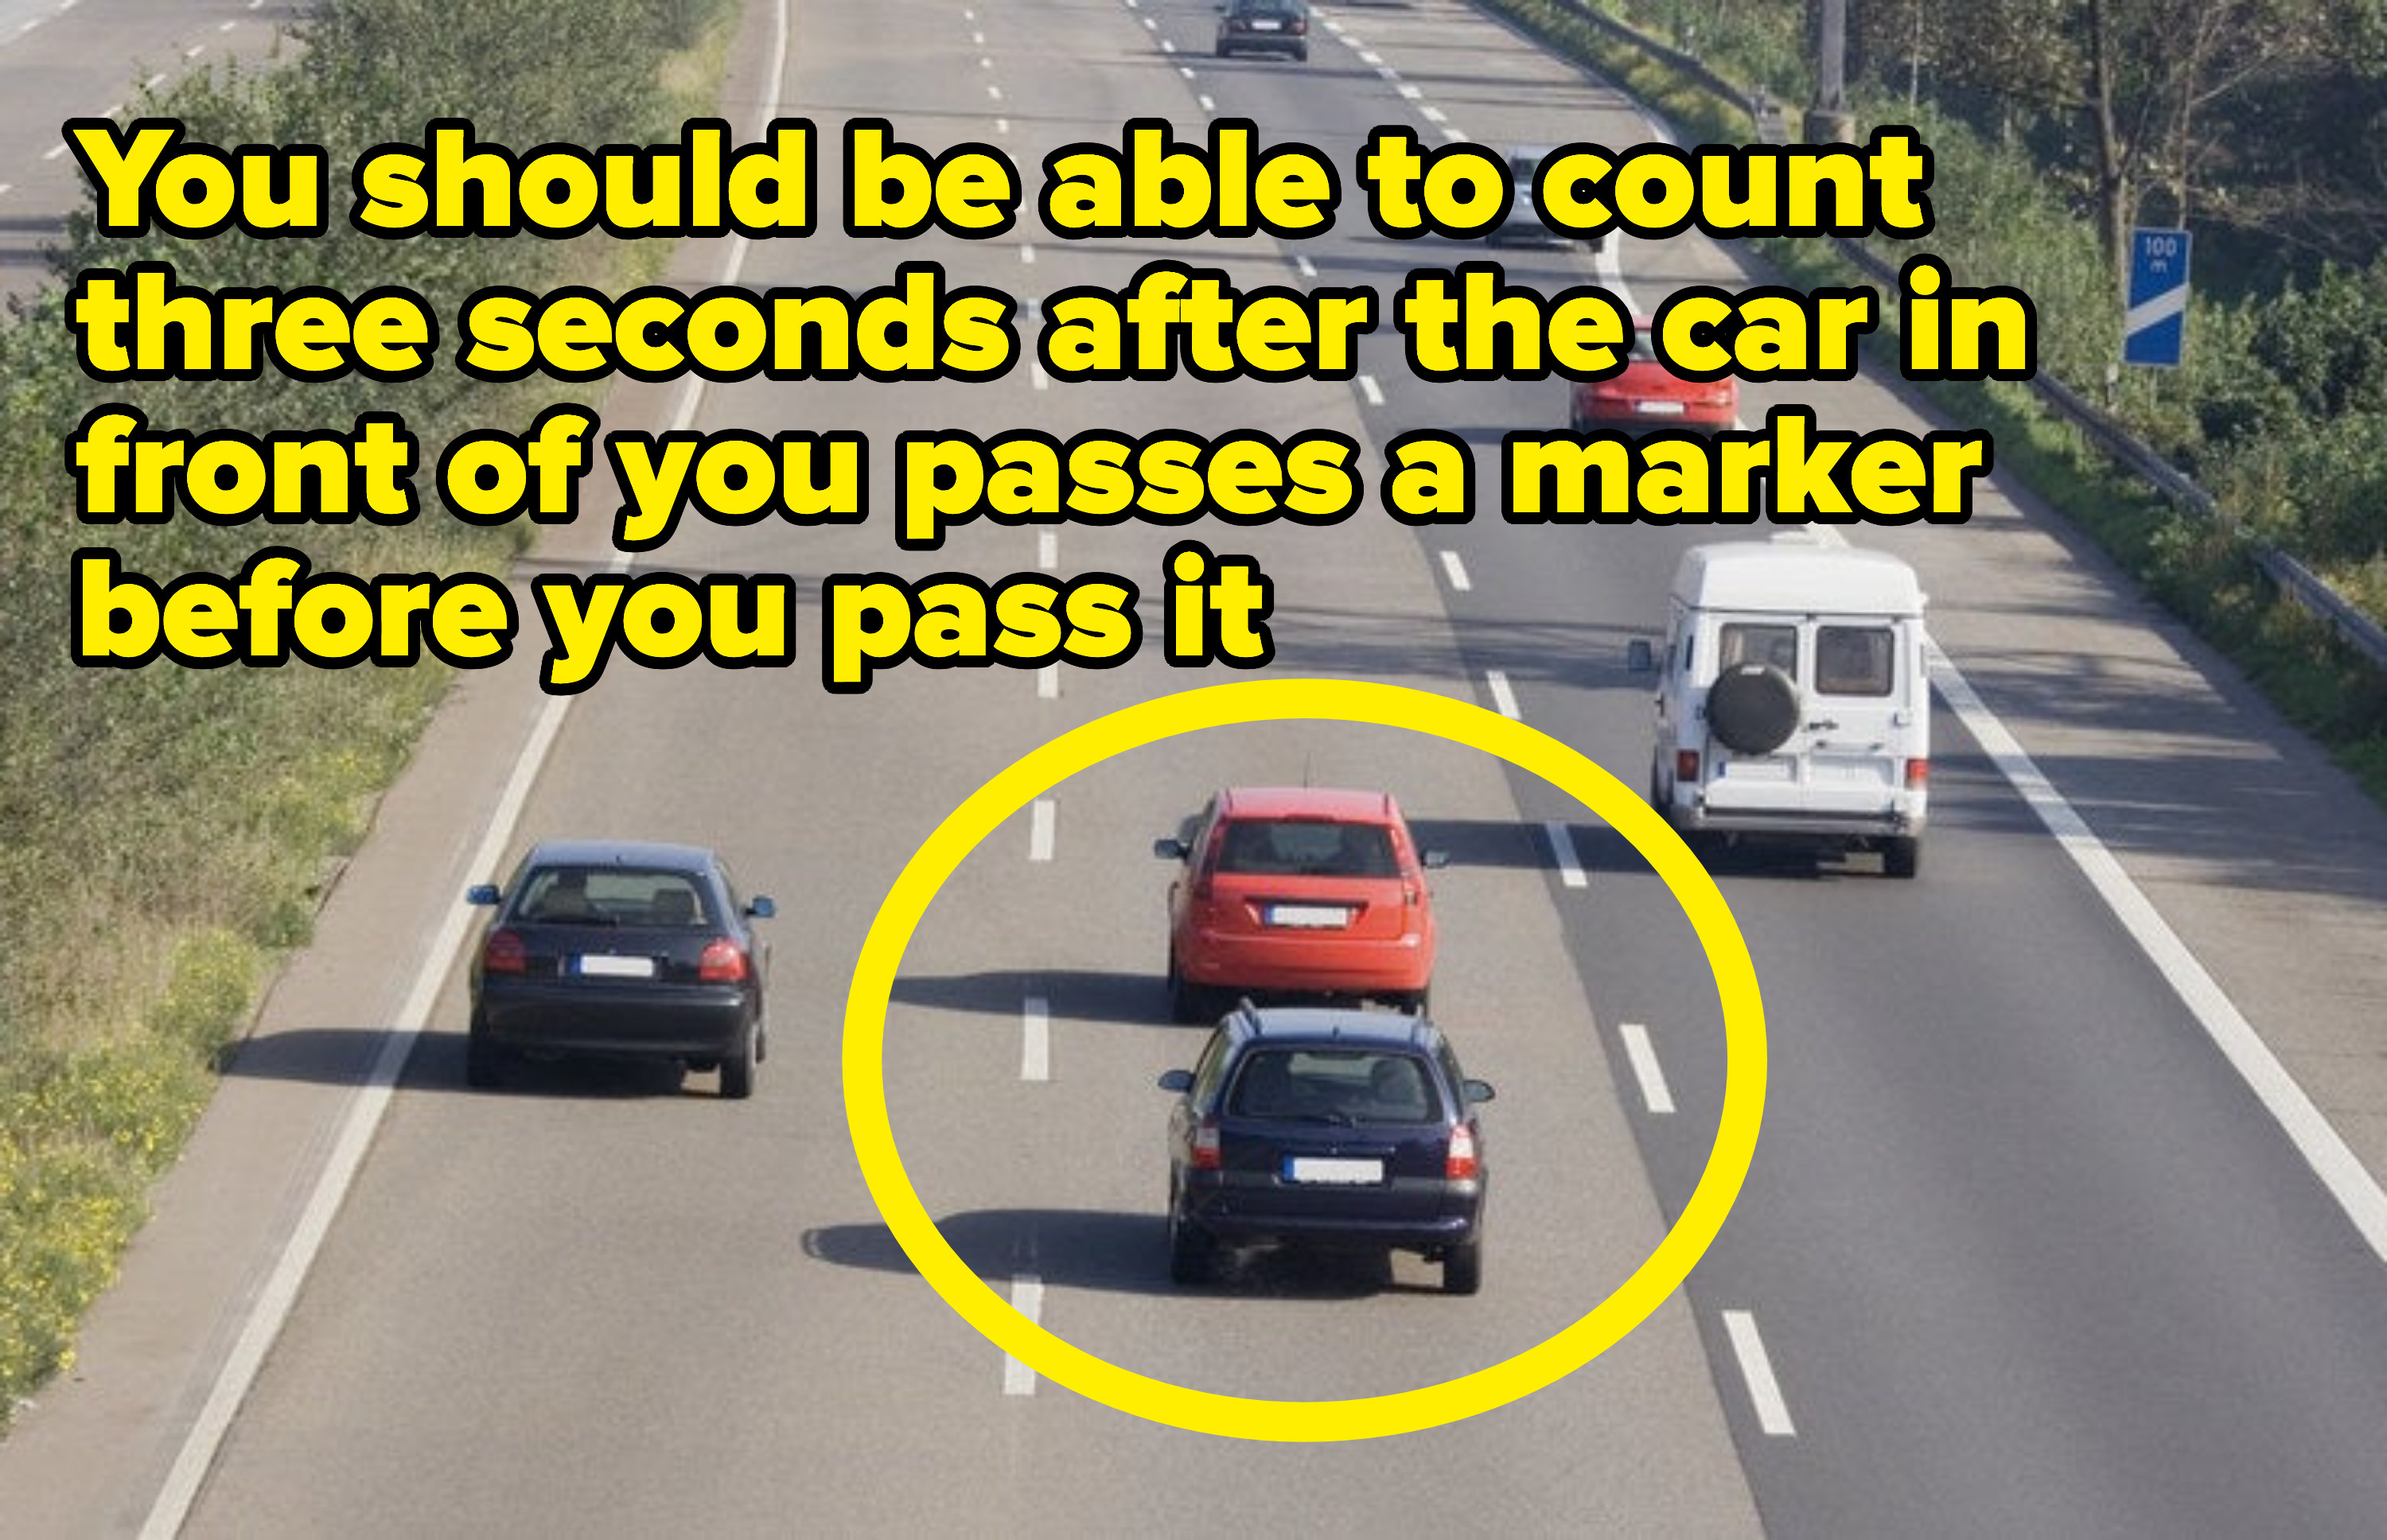 circle around cars too close together with text, you should be able to count three seconds after the car in front passes a marker before you pass it